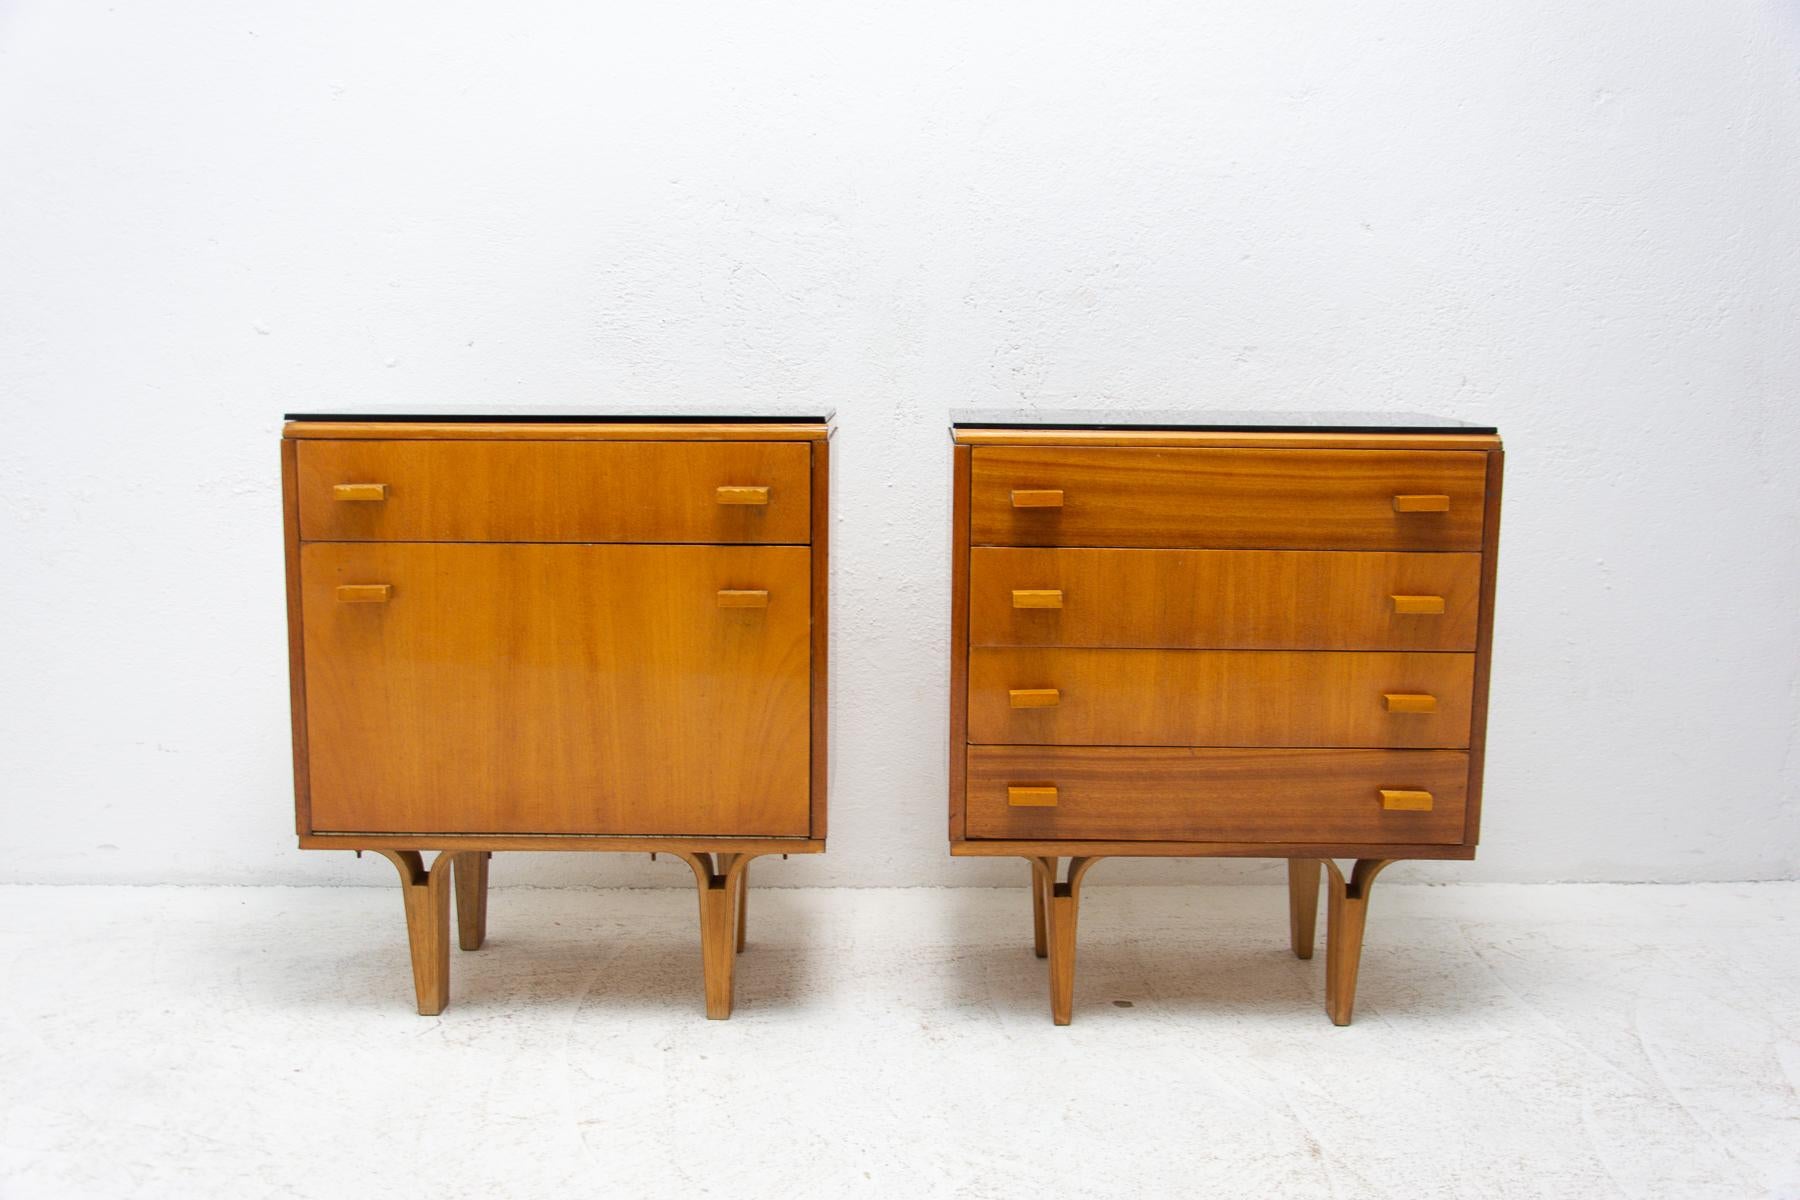 Pair of mid century night stands, chest of drawers by Frantisek Mezulanik, Nový Domov, 1970´s

These night tables were designed by Czechoslovak architect František Mezulánik for Nový Domov company in the former Czechoslovakia in the